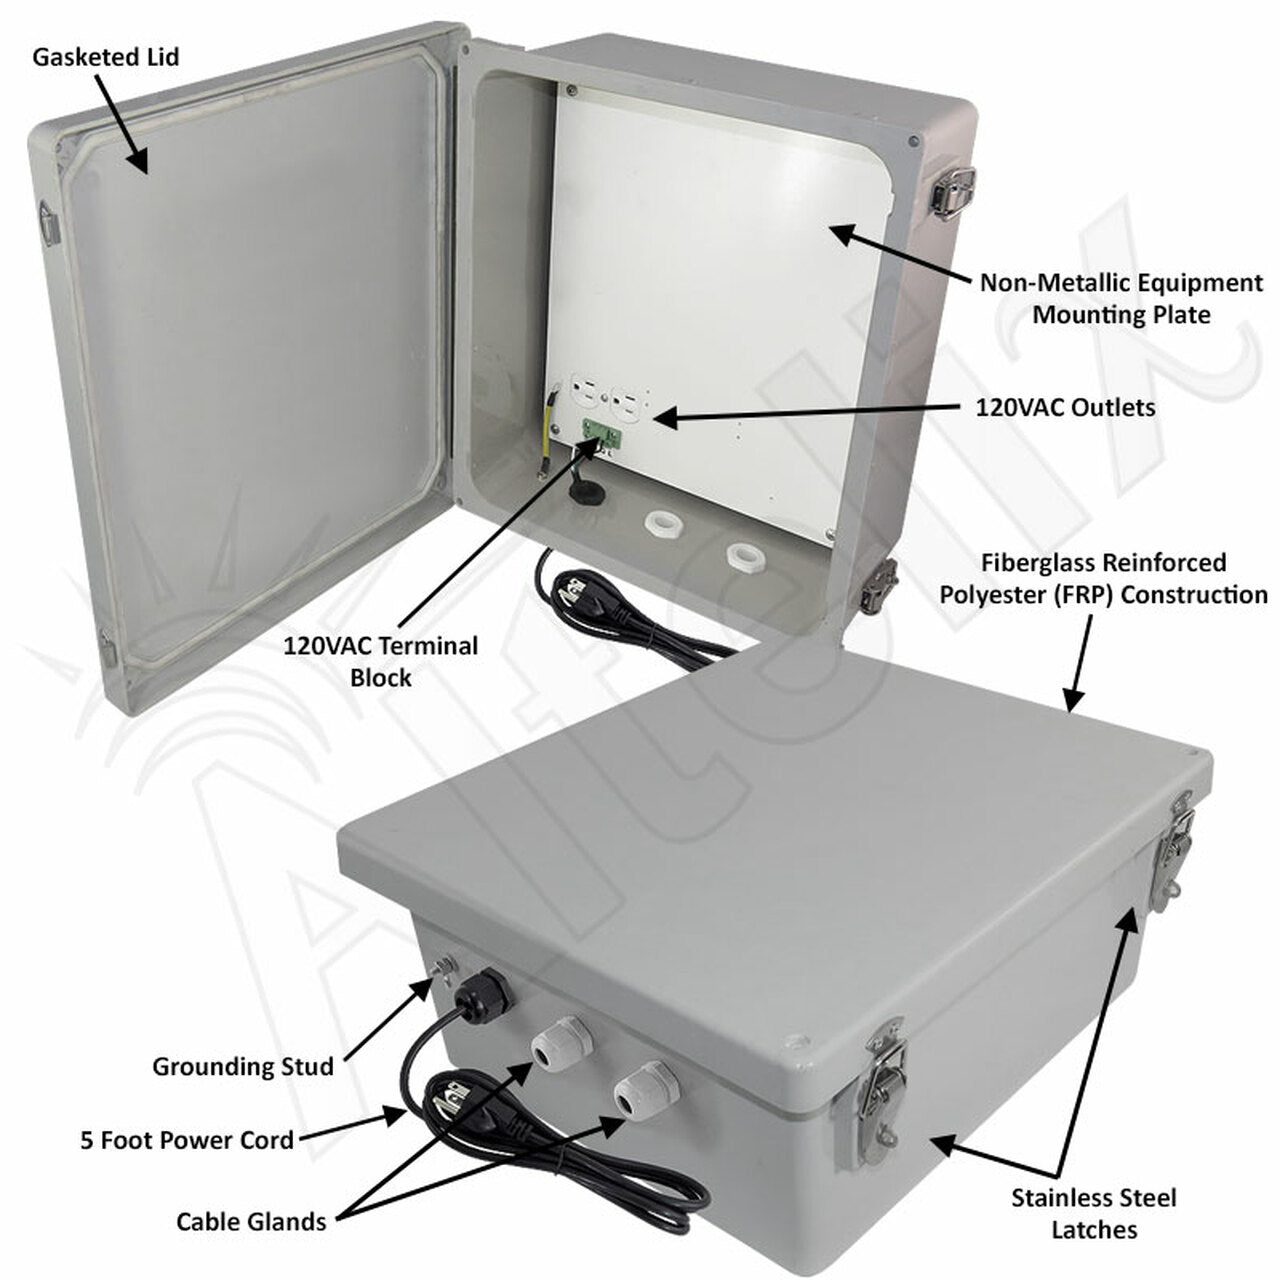 Altelix Fiberglass Weatherproof WiFi NEMA 4X Enclosure with Polyester Mounting Plate, 120 VAC Outlets & Power Cord